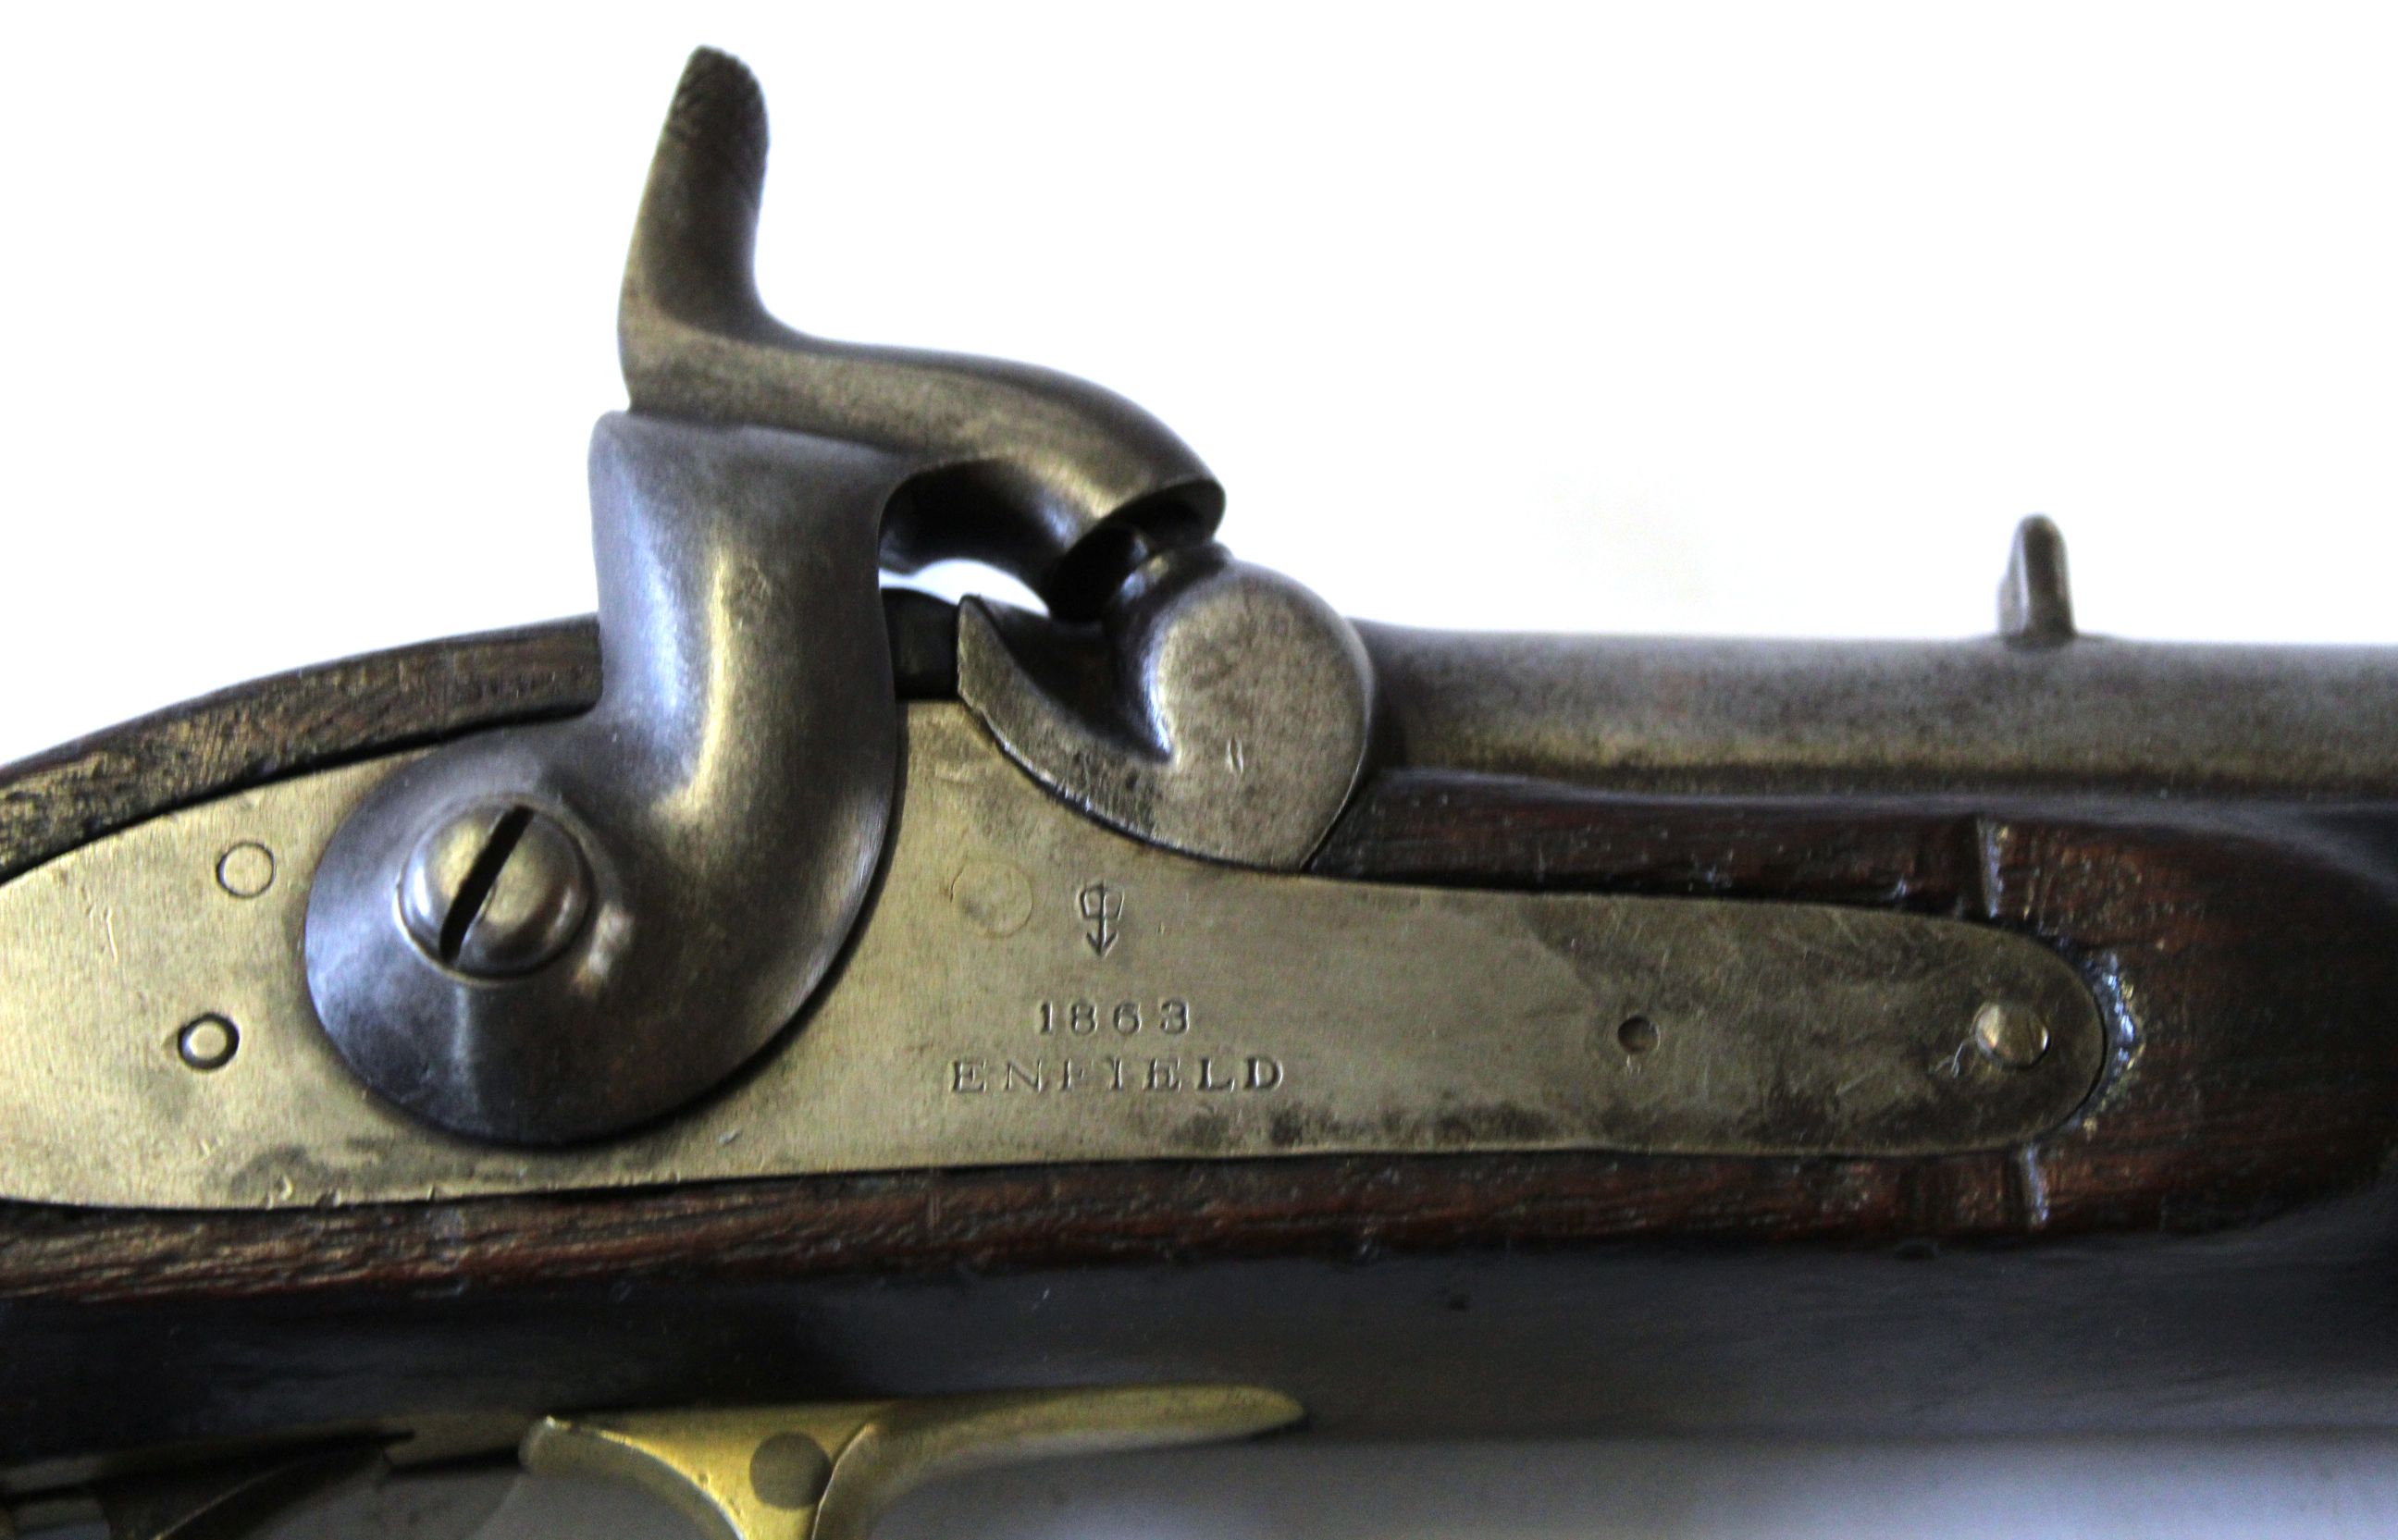 Indian Army issue Enfield musket dated 1863 with wooden stock and inlaid brass plate in Hindi - Image 8 of 10